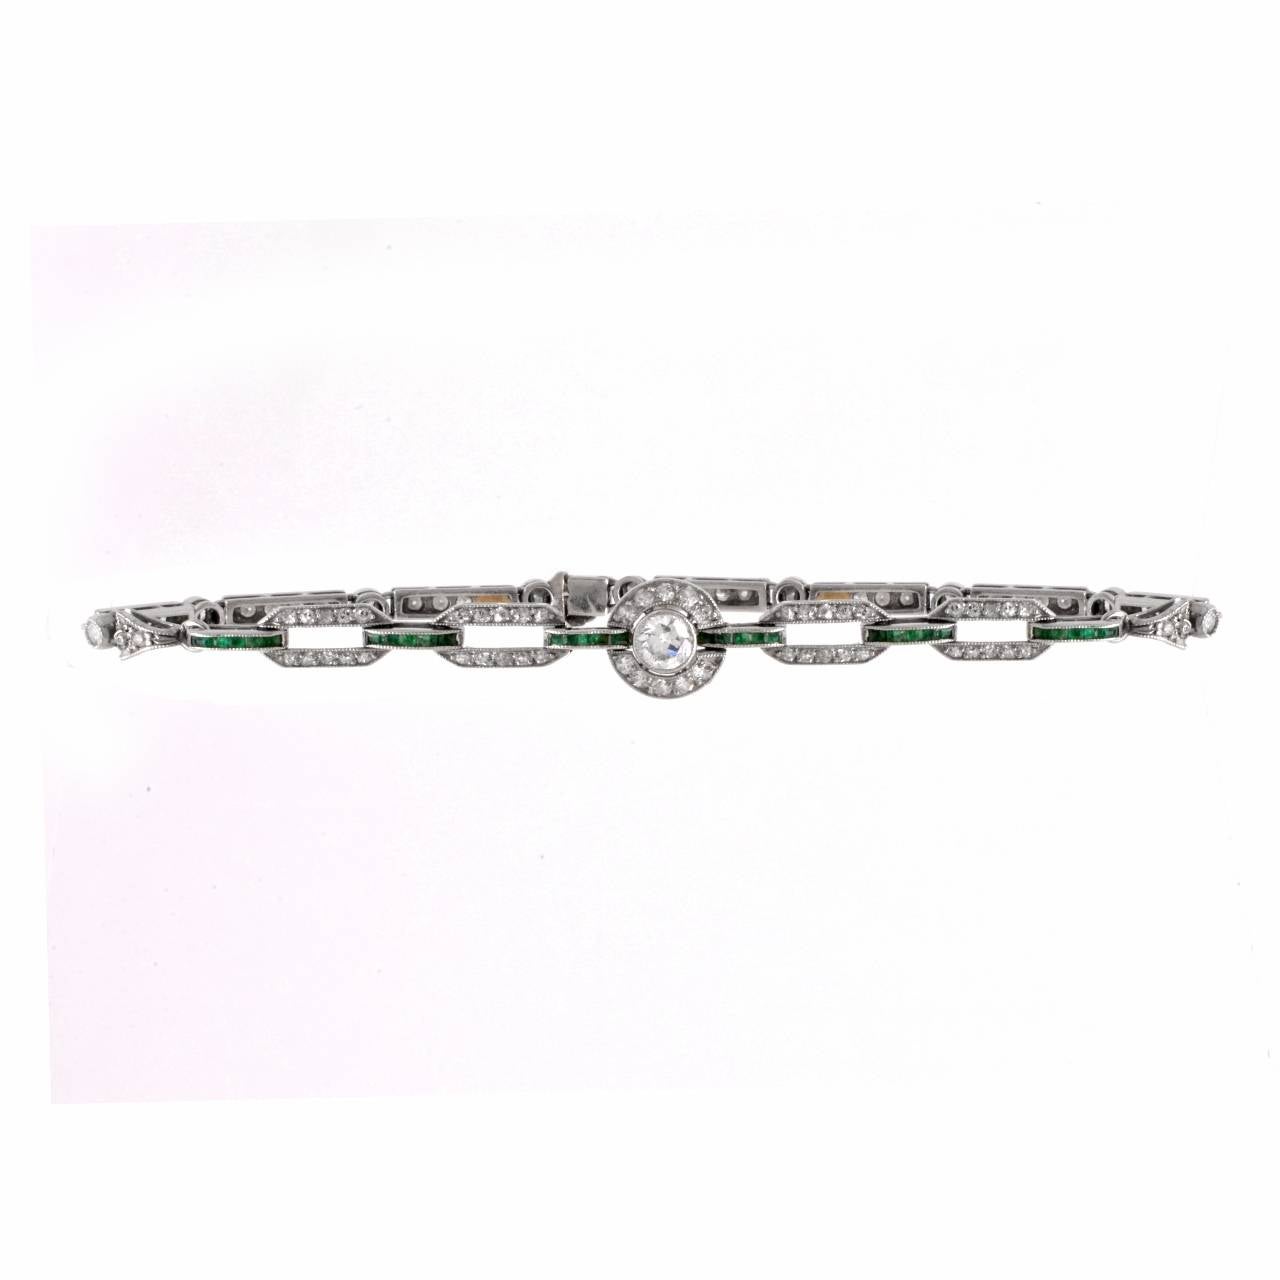 This lovely  Art Deco bracelet  is crafted in solid platinum and  incorporates flexible geometric links. Set at the center is a 0.20 ct round-faceted diamond graded H-I color and VS clarity, surrounded by pave diamonds. This bracelet is cumulatively